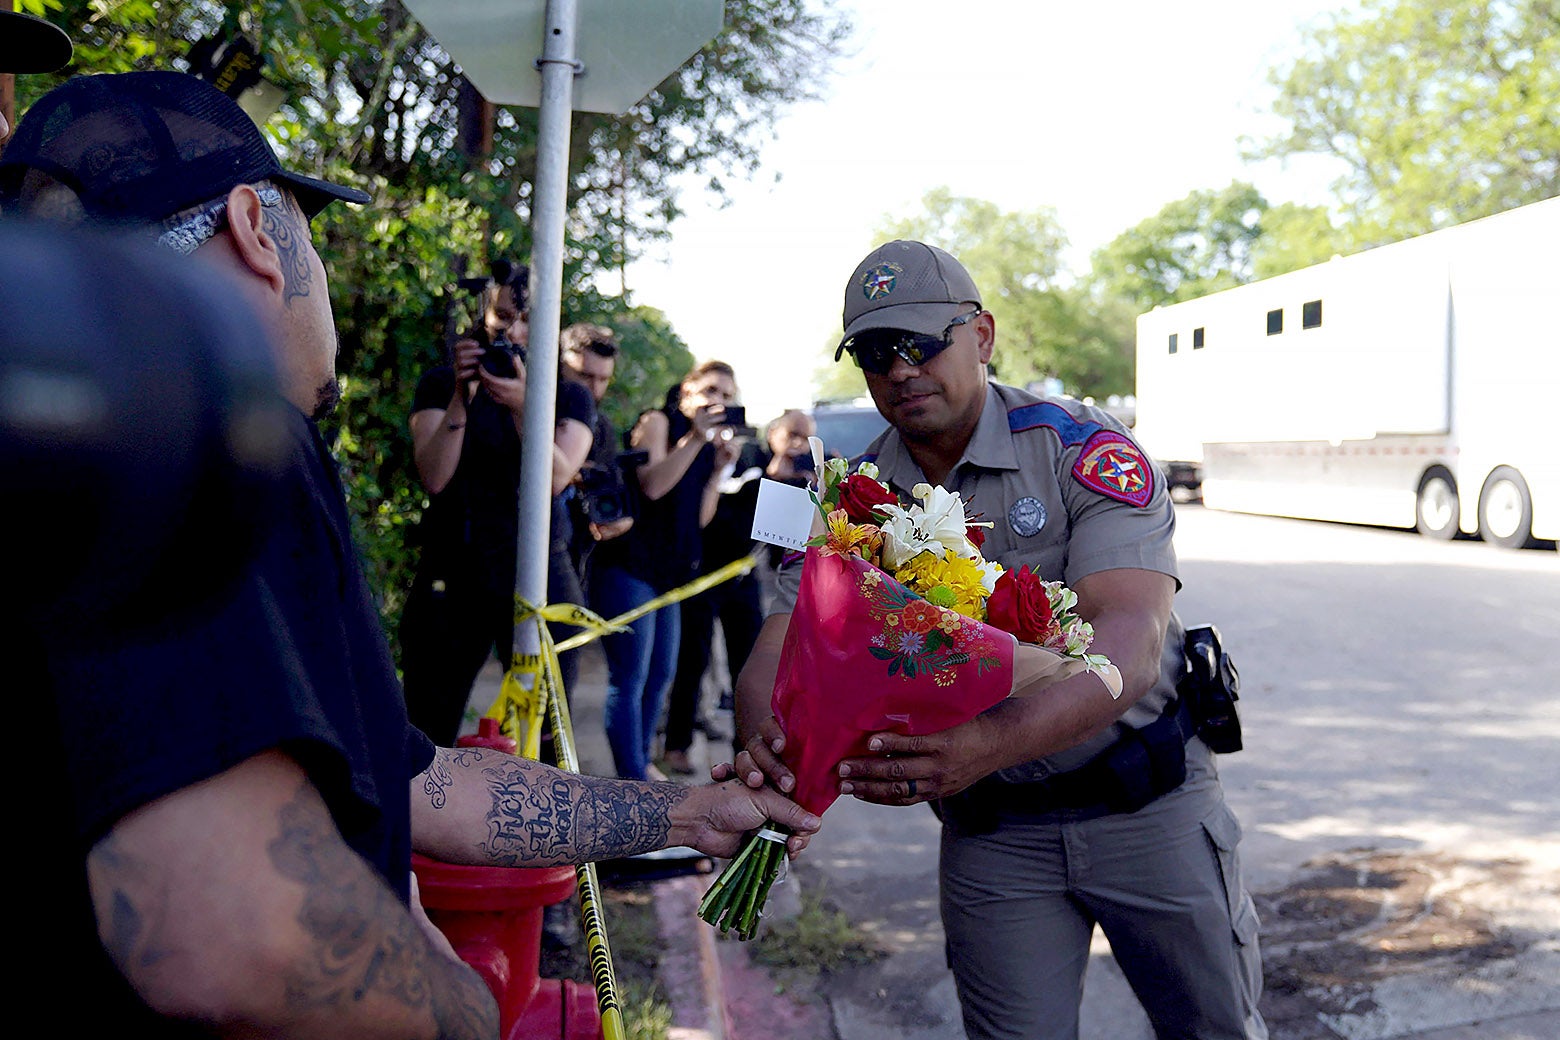 A police officer takes flowers for the memorial from a person standing behind yellow police tape.